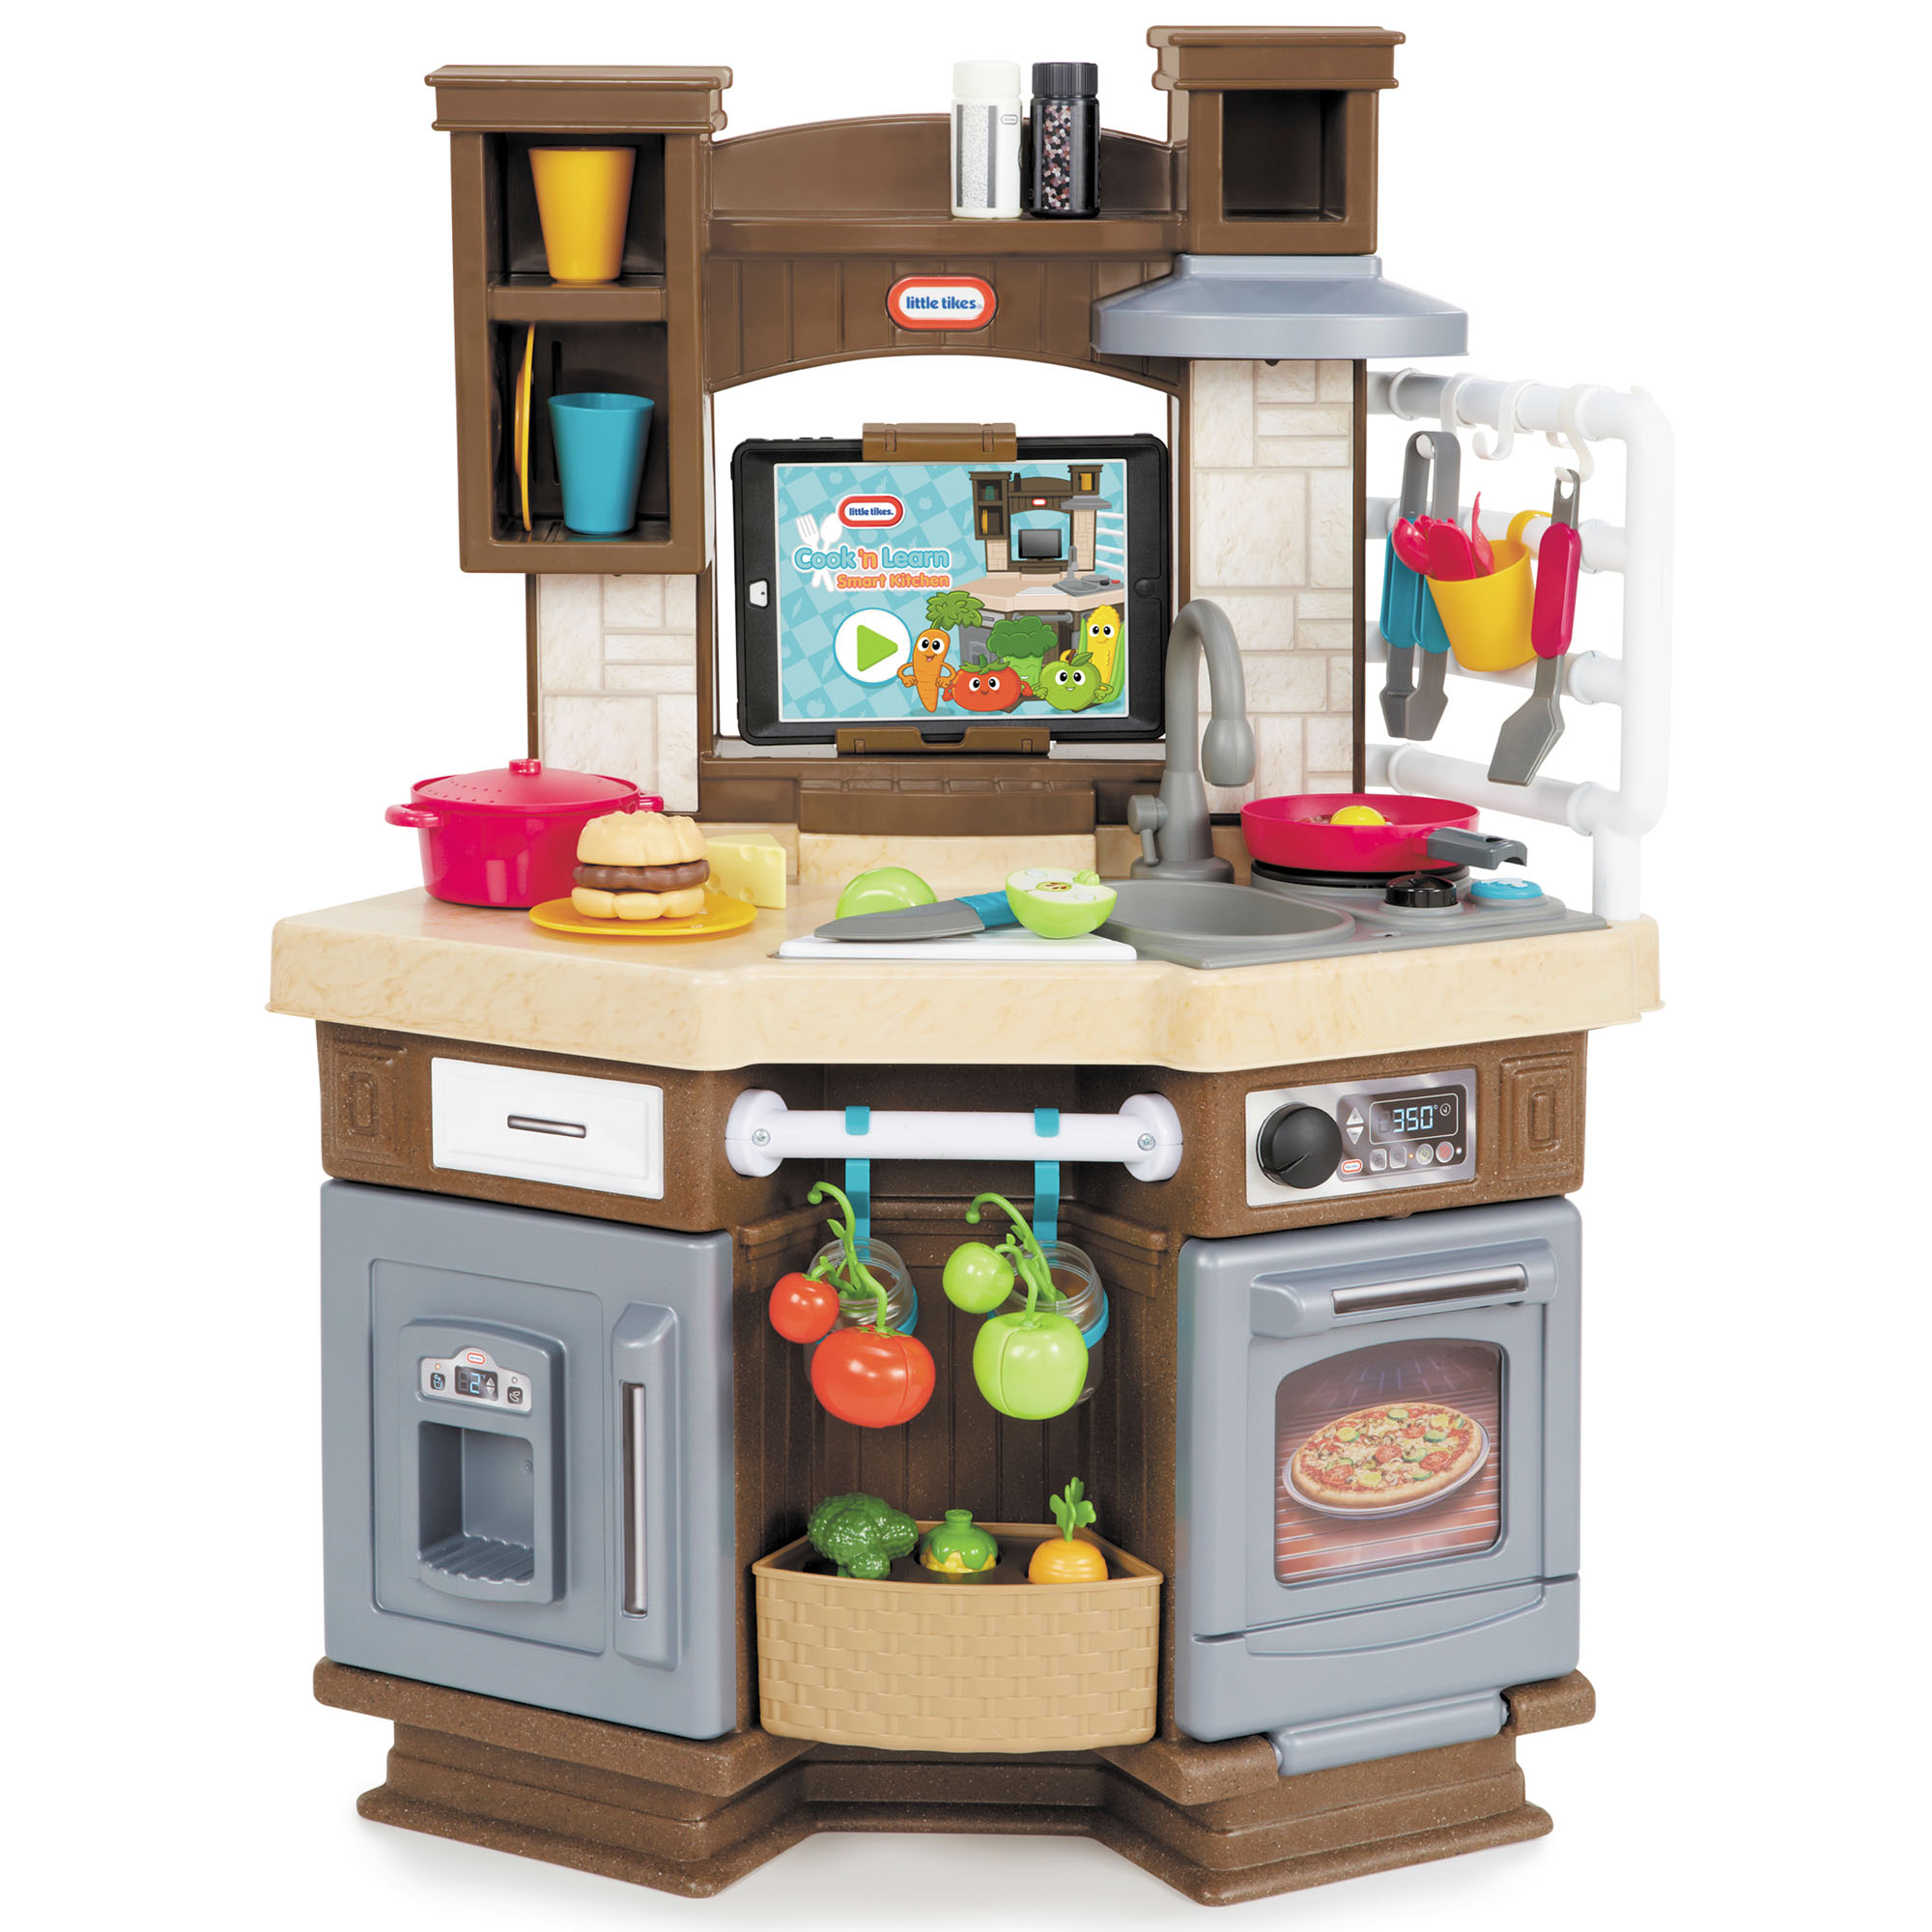 Little Tikes Cook 'n Learn Smart 40-Piece Pretend Play Kitchen Toys Playset with Interactive Games, 4 Play Modes, Multi-color- For Kids Toddlers Girls Boys Ages 3 4 5+ - image 1 of 10